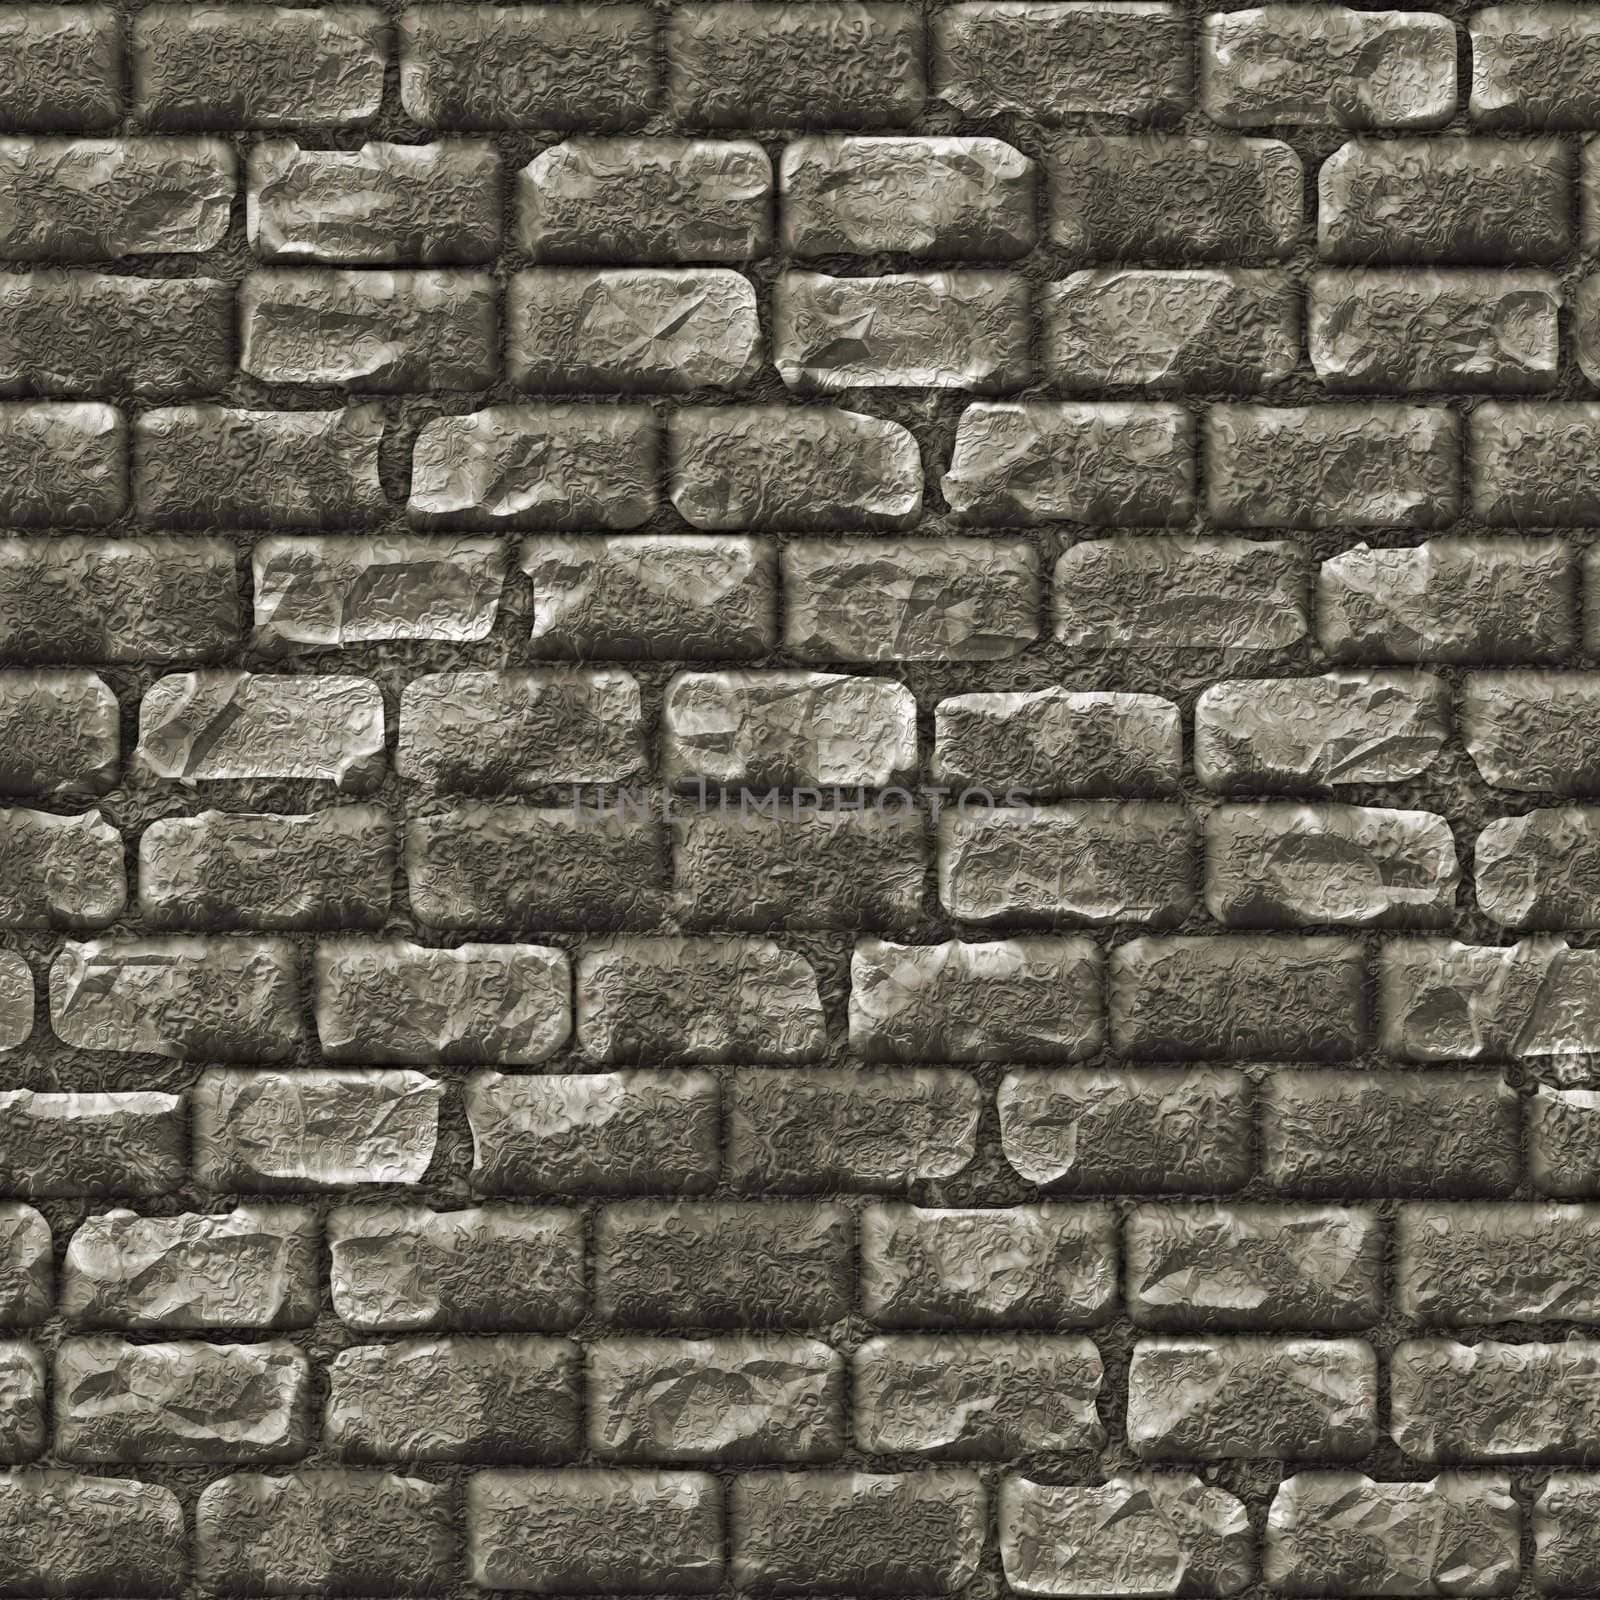 Seamless Stone Brick Wall as Textured Background